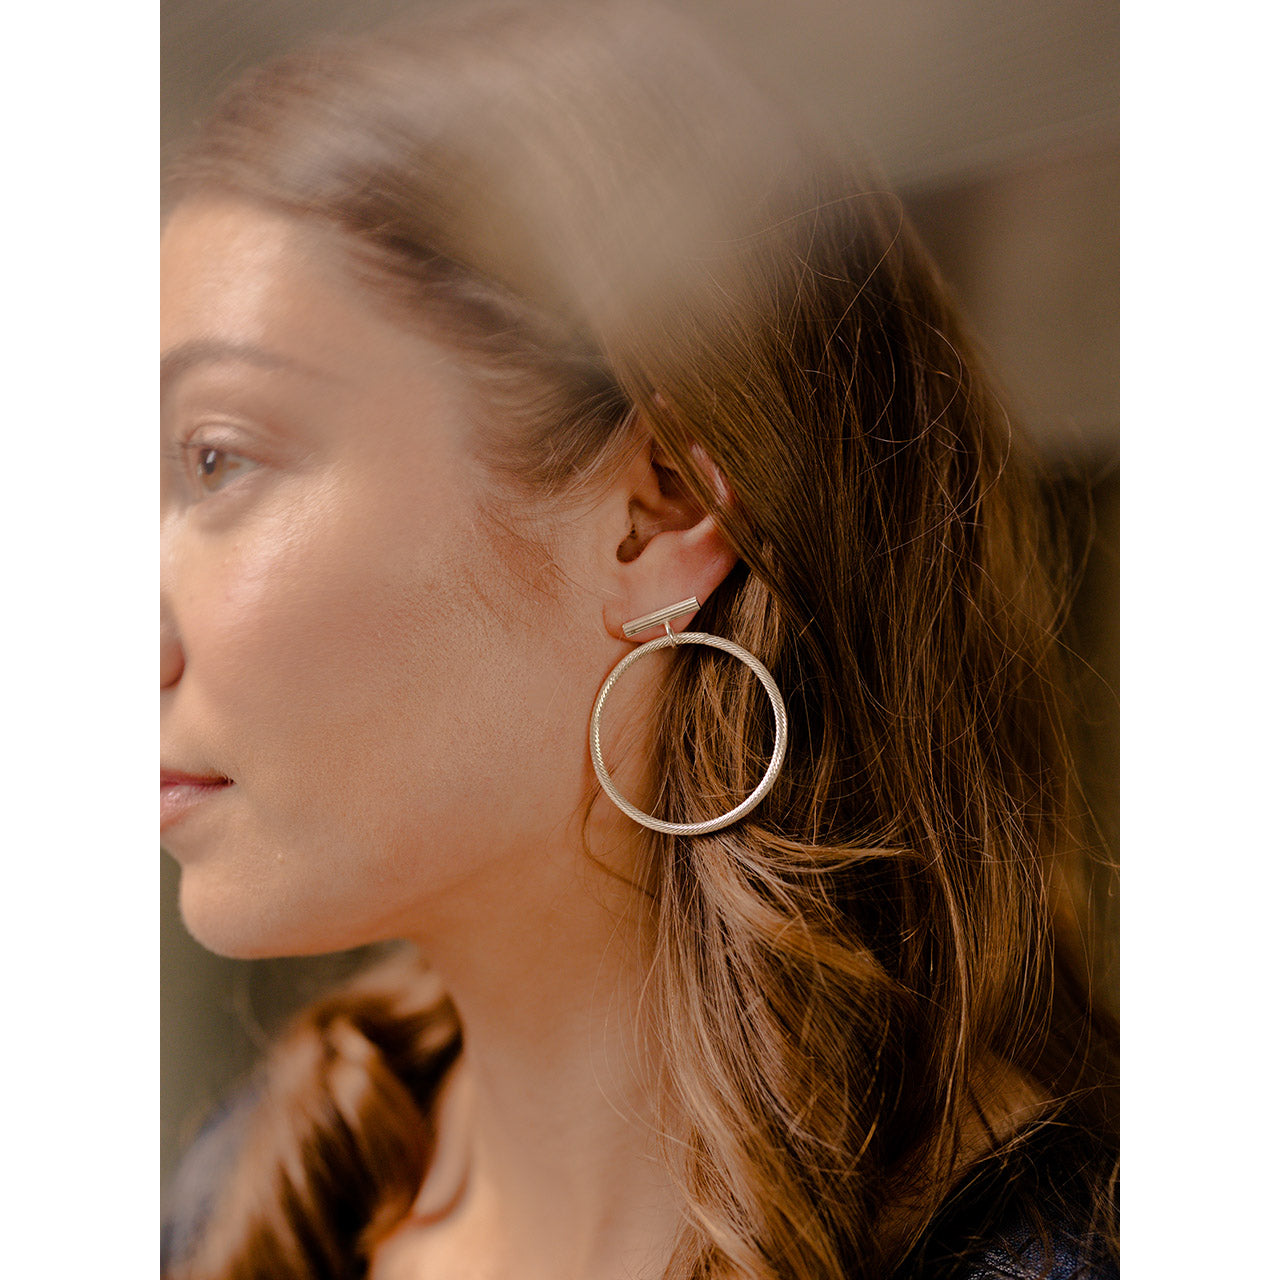 These earrings boast a round horizontal bar adorned with an intricately engraved pattern, and a loop at its center.